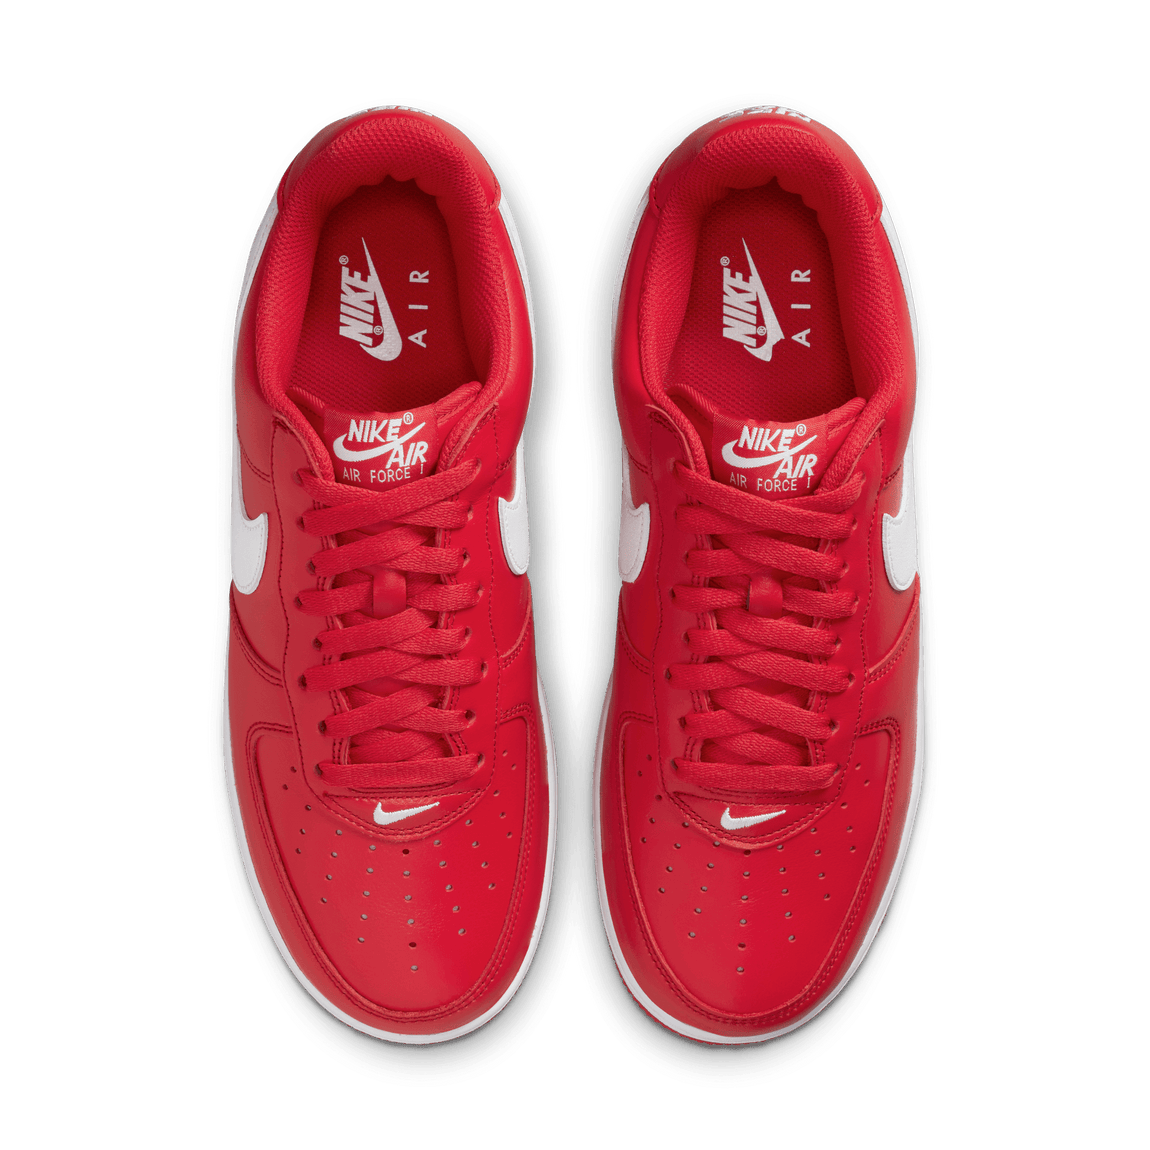 Nike Air Force 1 Low Retro (University Red/White) - Nike Air Force 1 Low Retro (University Red/White) - 